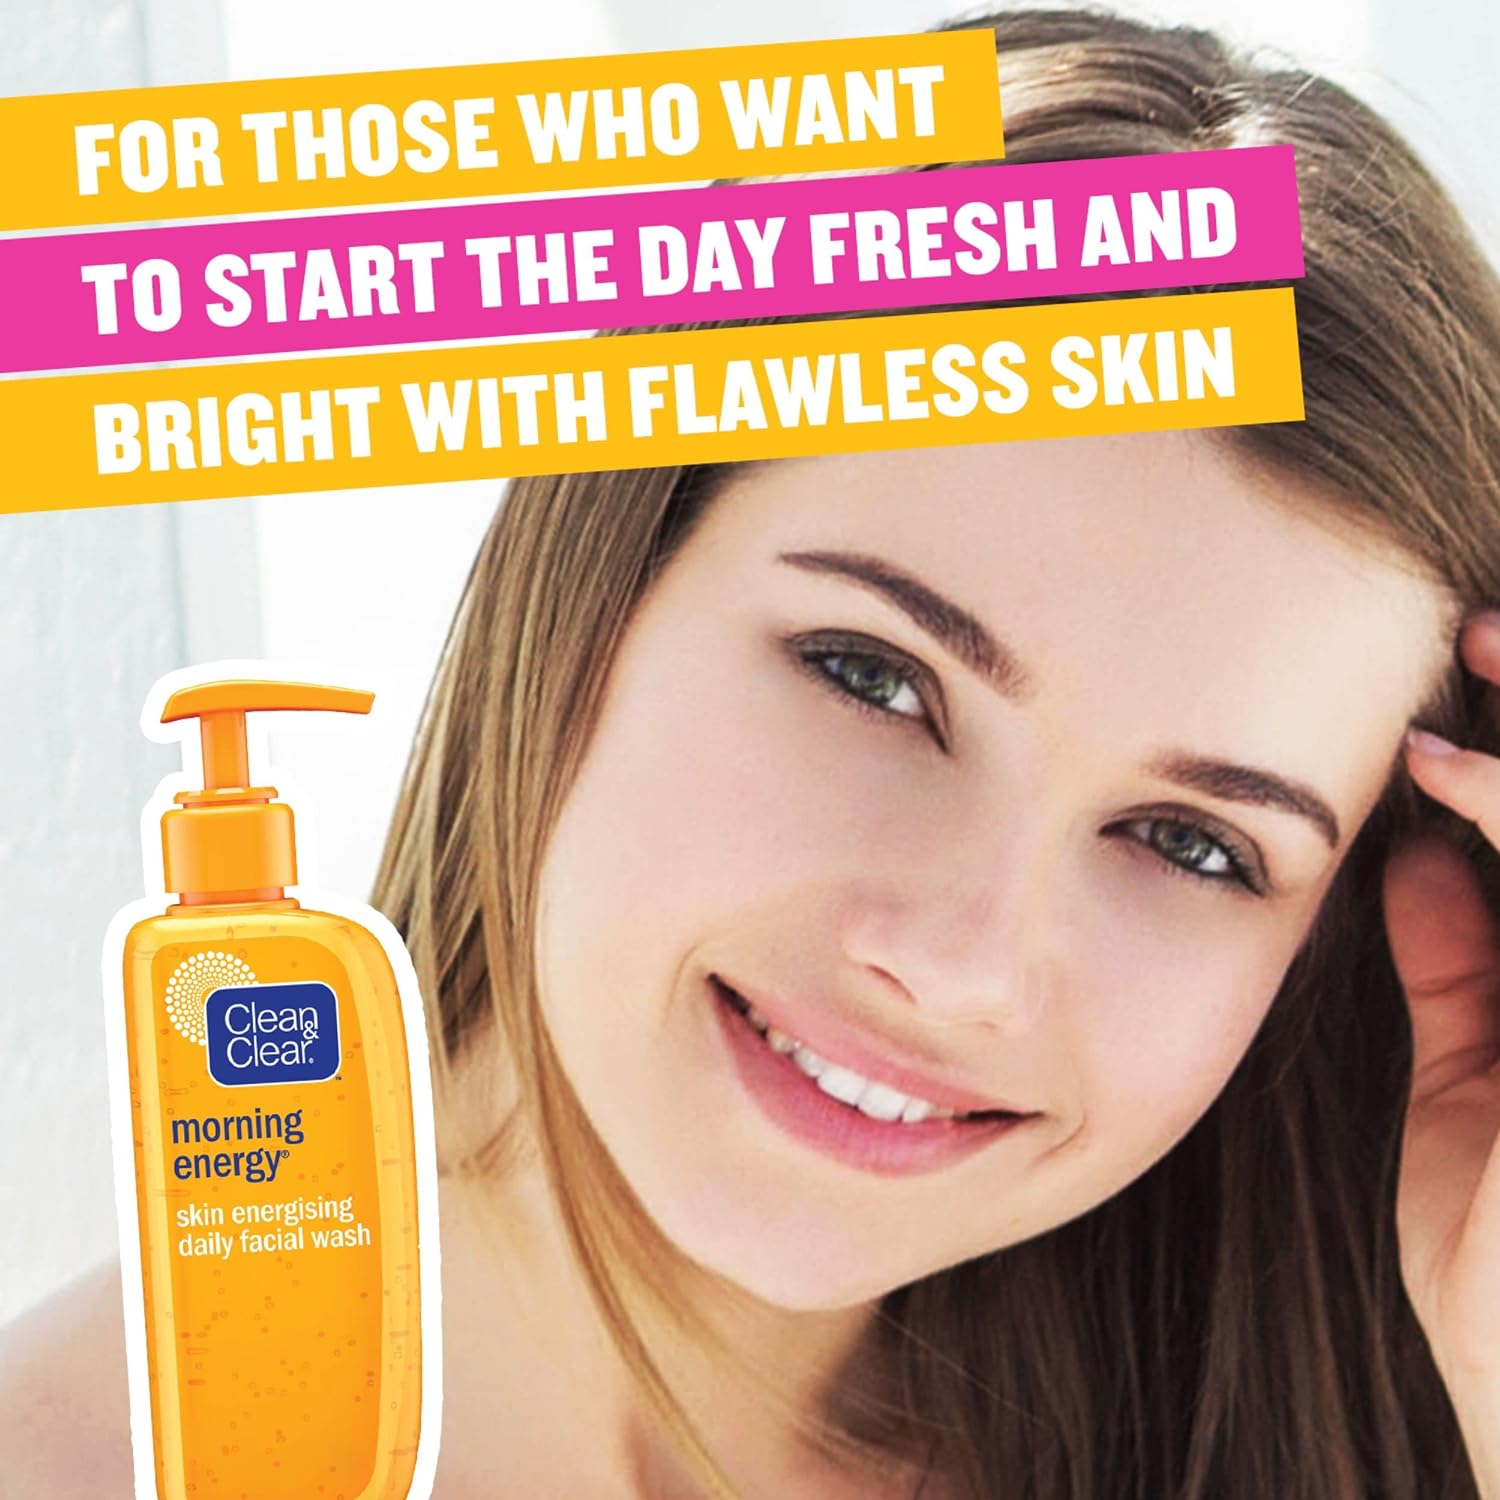 Clean & Clear® Morning Energy Skin Energising Daily Facial Wash